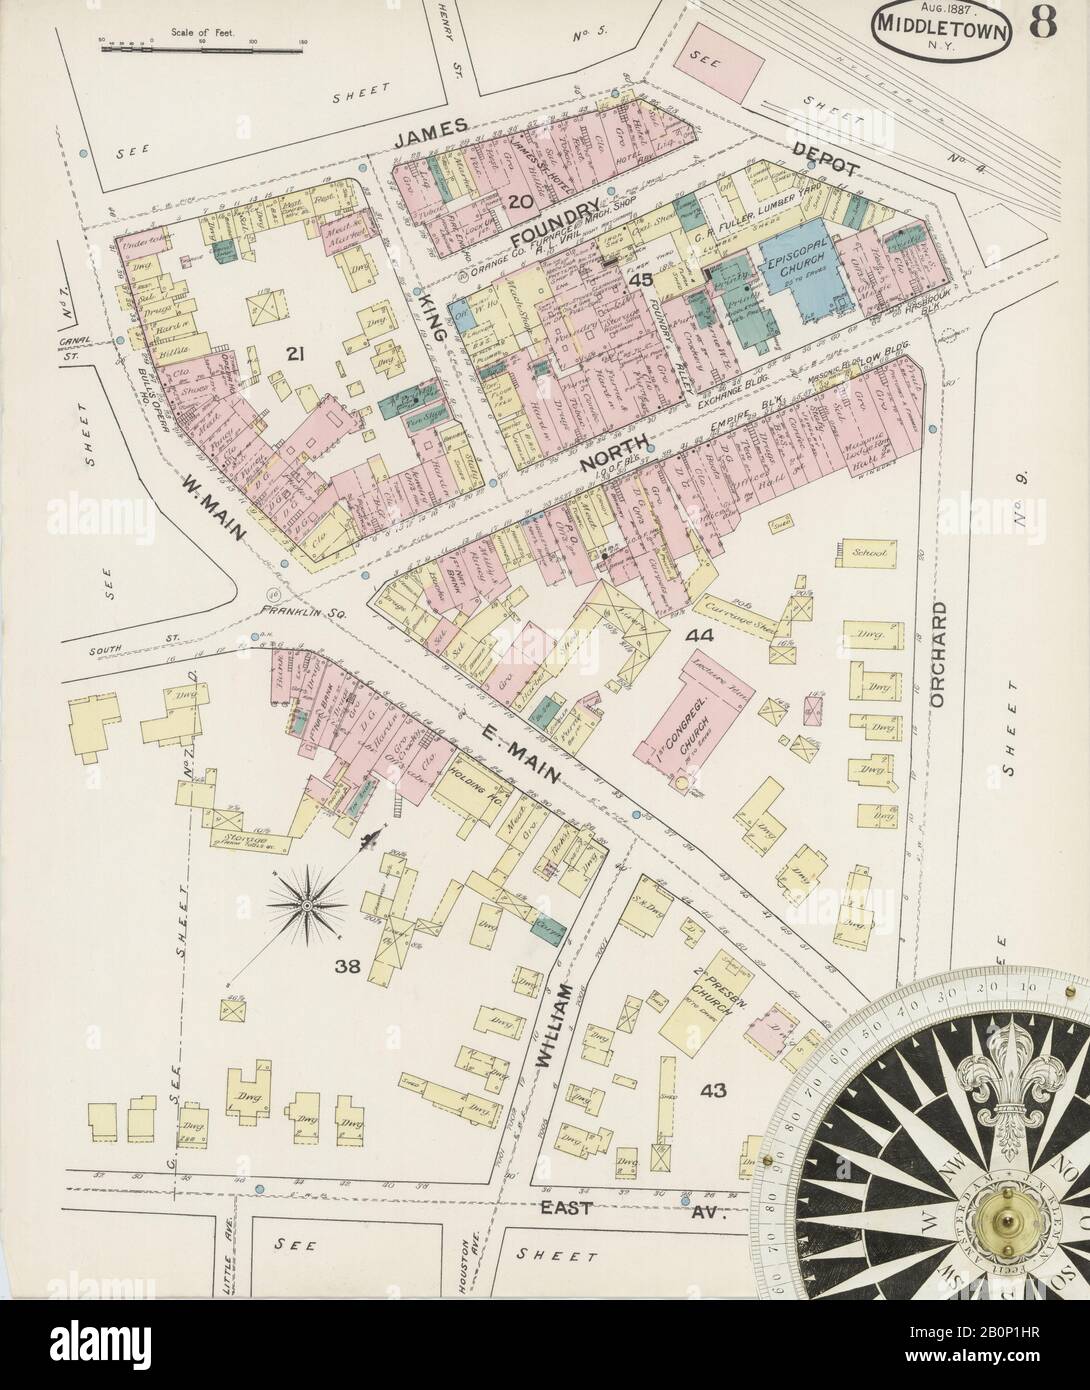 Image 8 Of Sanborn Fire Insurance Map From Middletown Orange